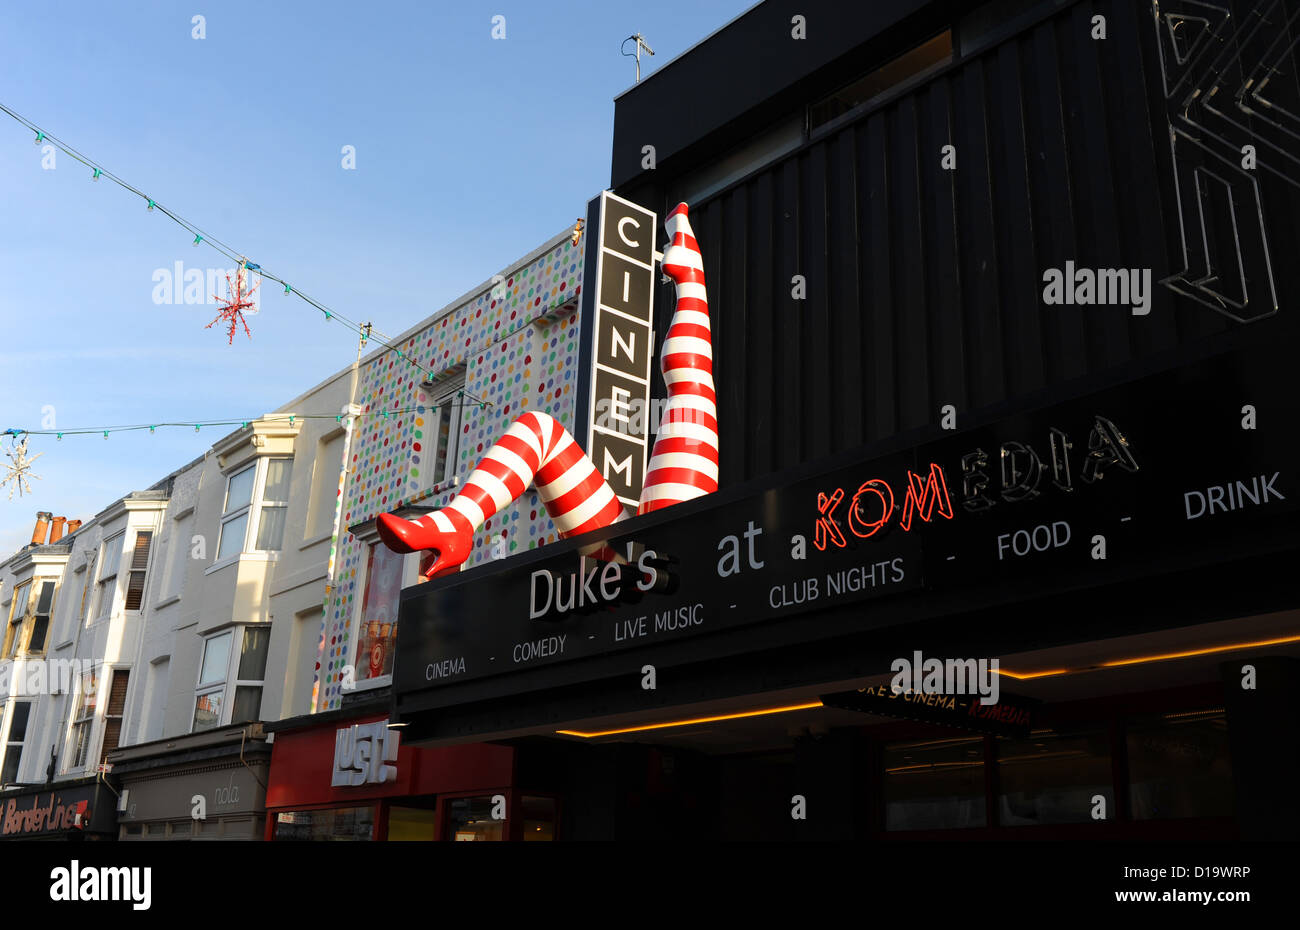 The Komedia club and bar incorporating the Duke's picture house cinema in North Laines district Brighton UK Stock Photo